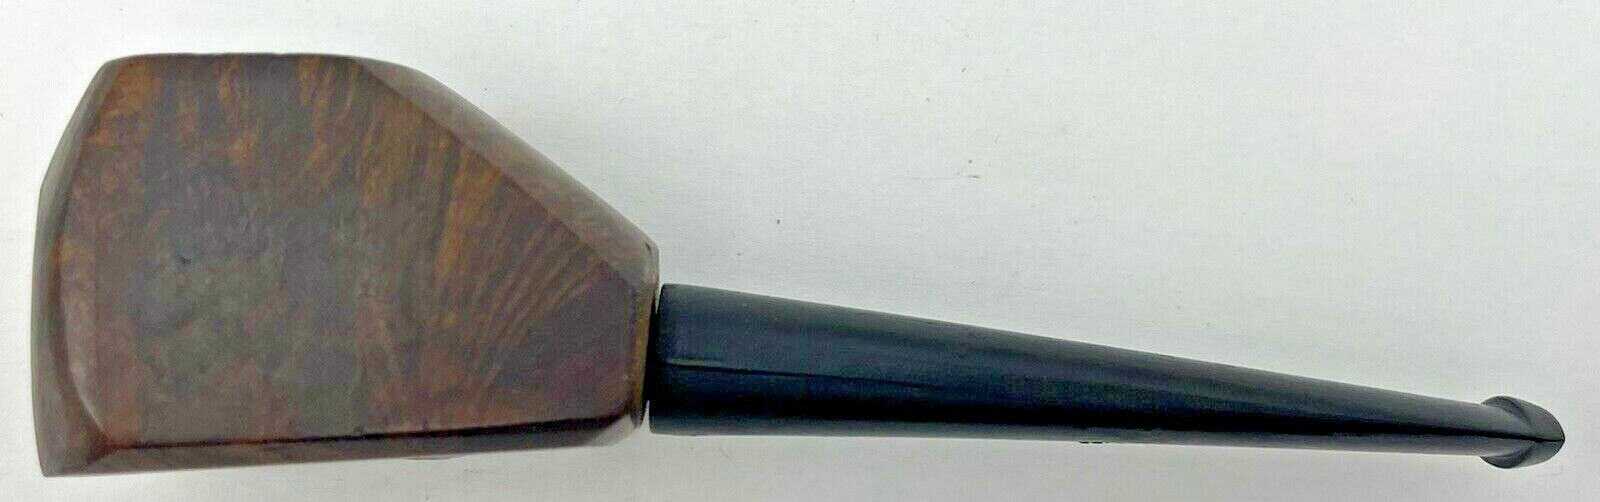 Vintage Imported Briar Root Tobacco Smoking Pipe Flat Bottom Geometric Rustic